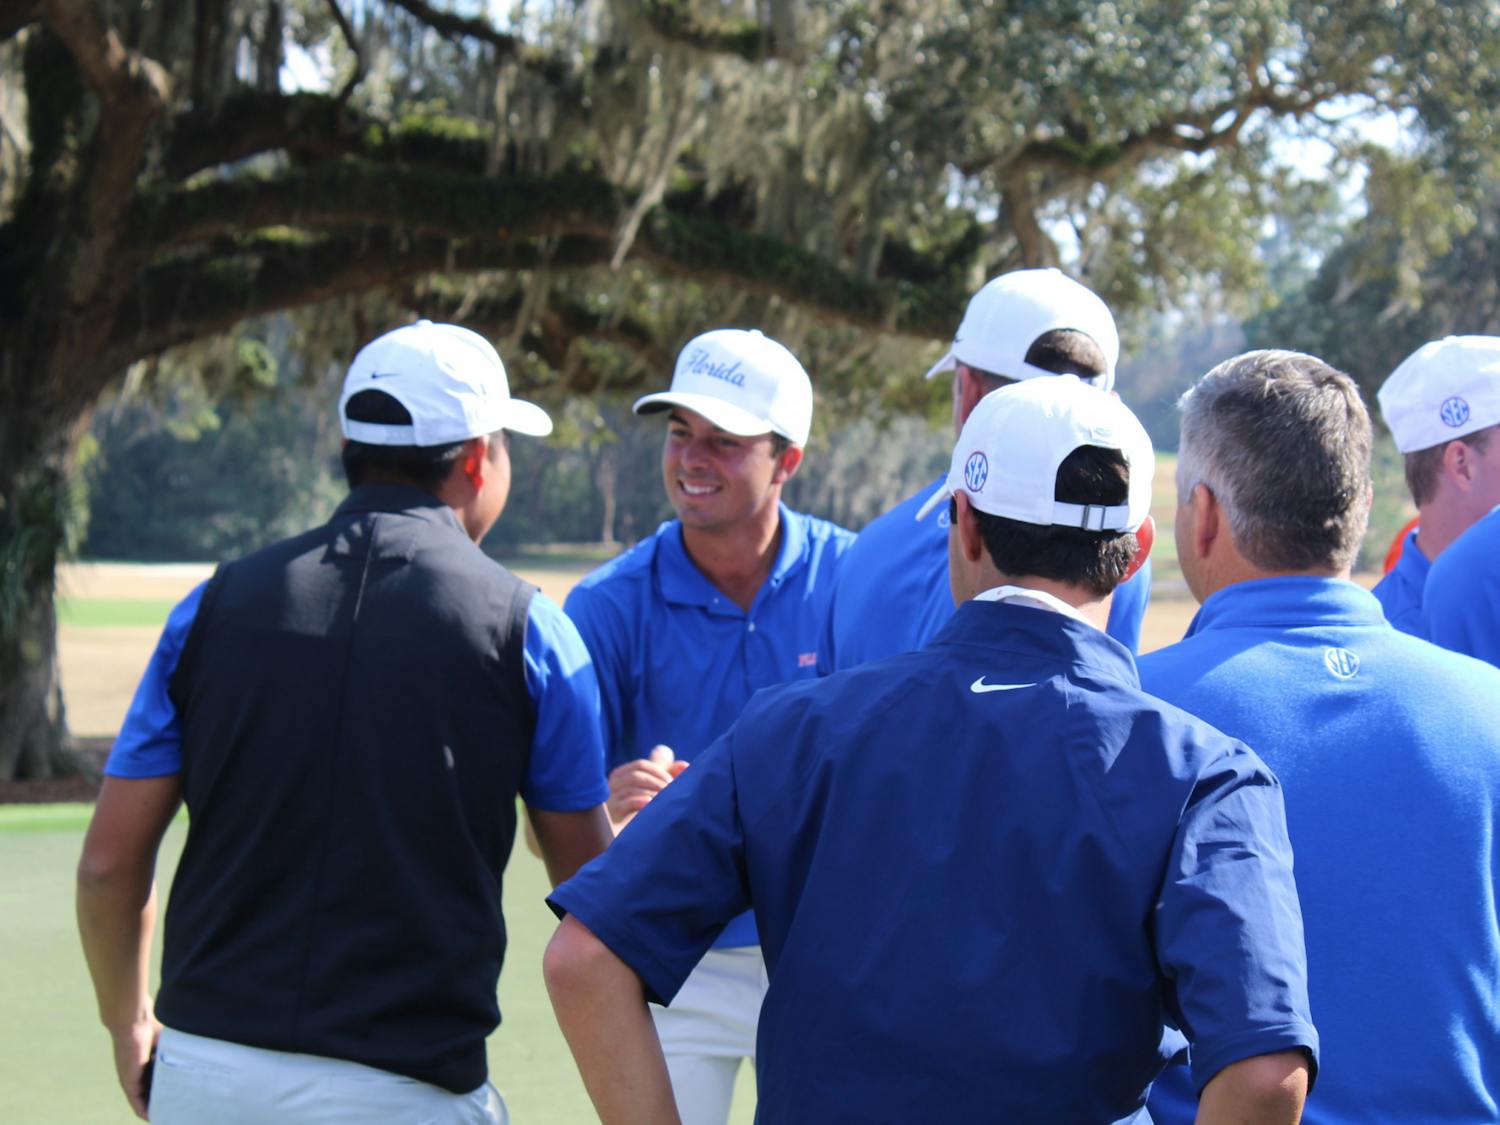 Fred Biondi celebrates with his team after draining a putt on the final hole of the Vystar Gators Invitational at the Mark Bostick Golf Course Sunday. The redshirt junior from São Paulo, Brazil finished 14-under to win the tournament with his individual score while contributing to Florida’s winning team score as well.